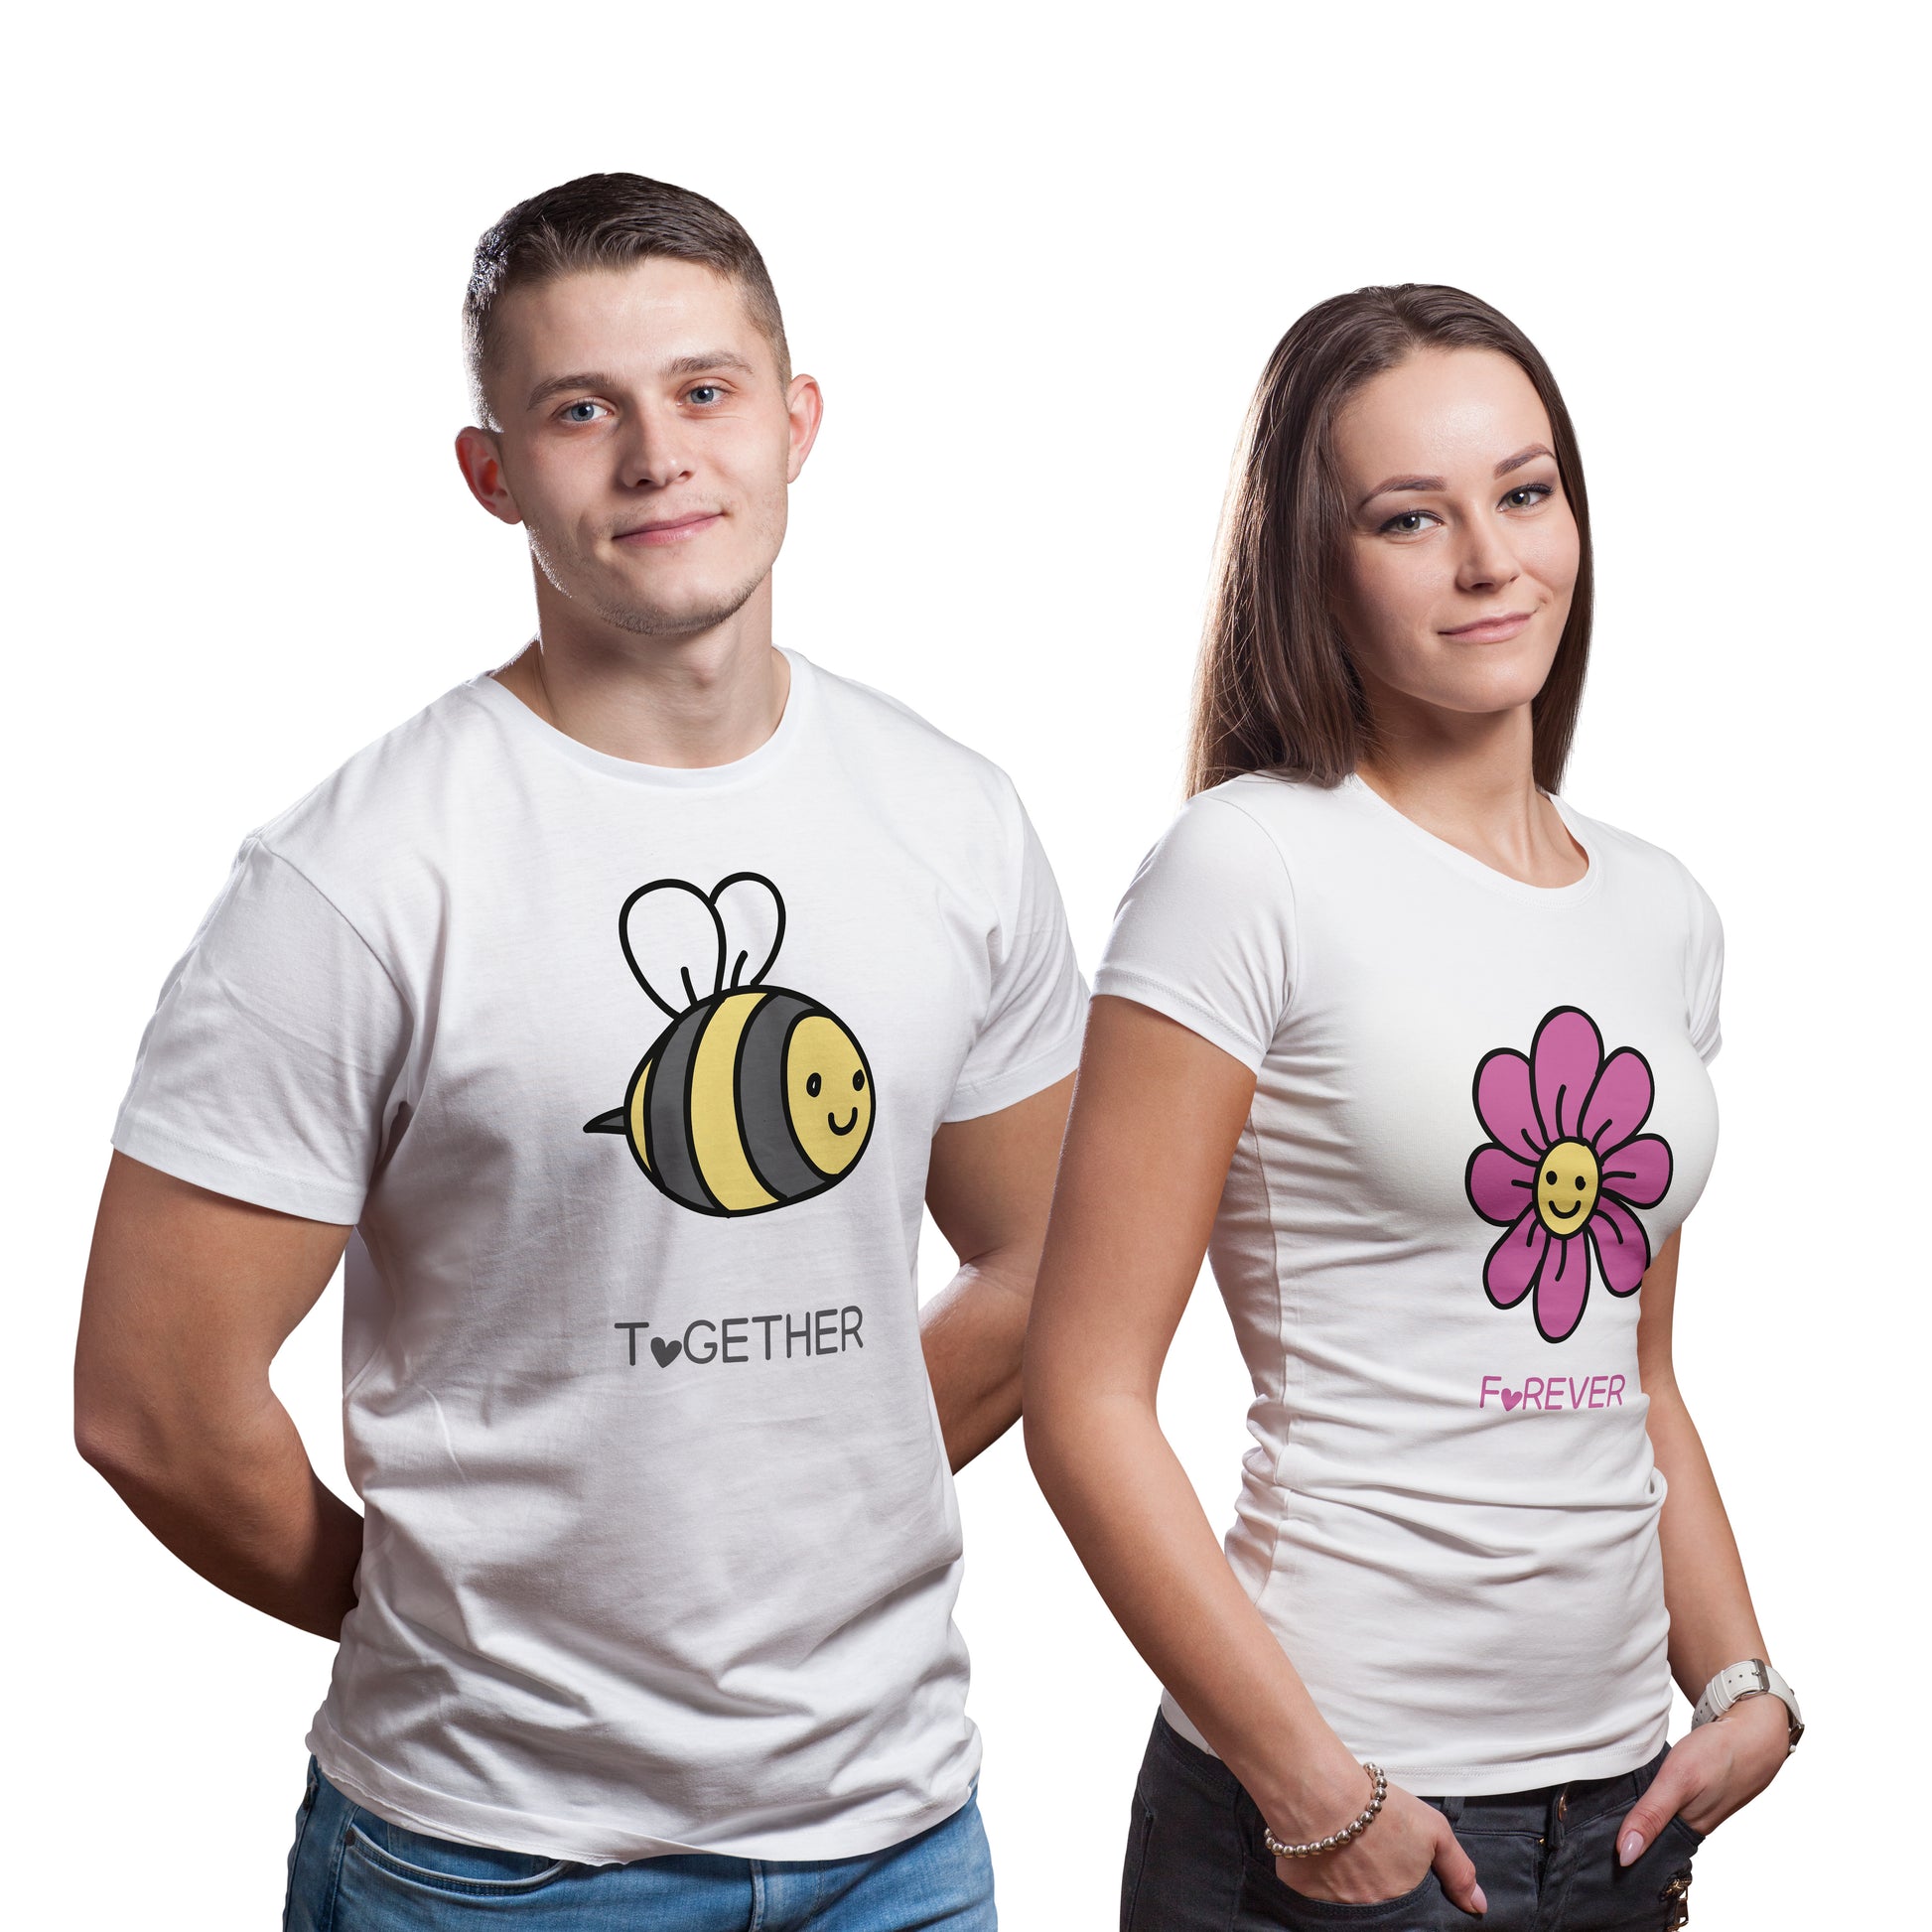 Together Forever matching Couple T shirts- White